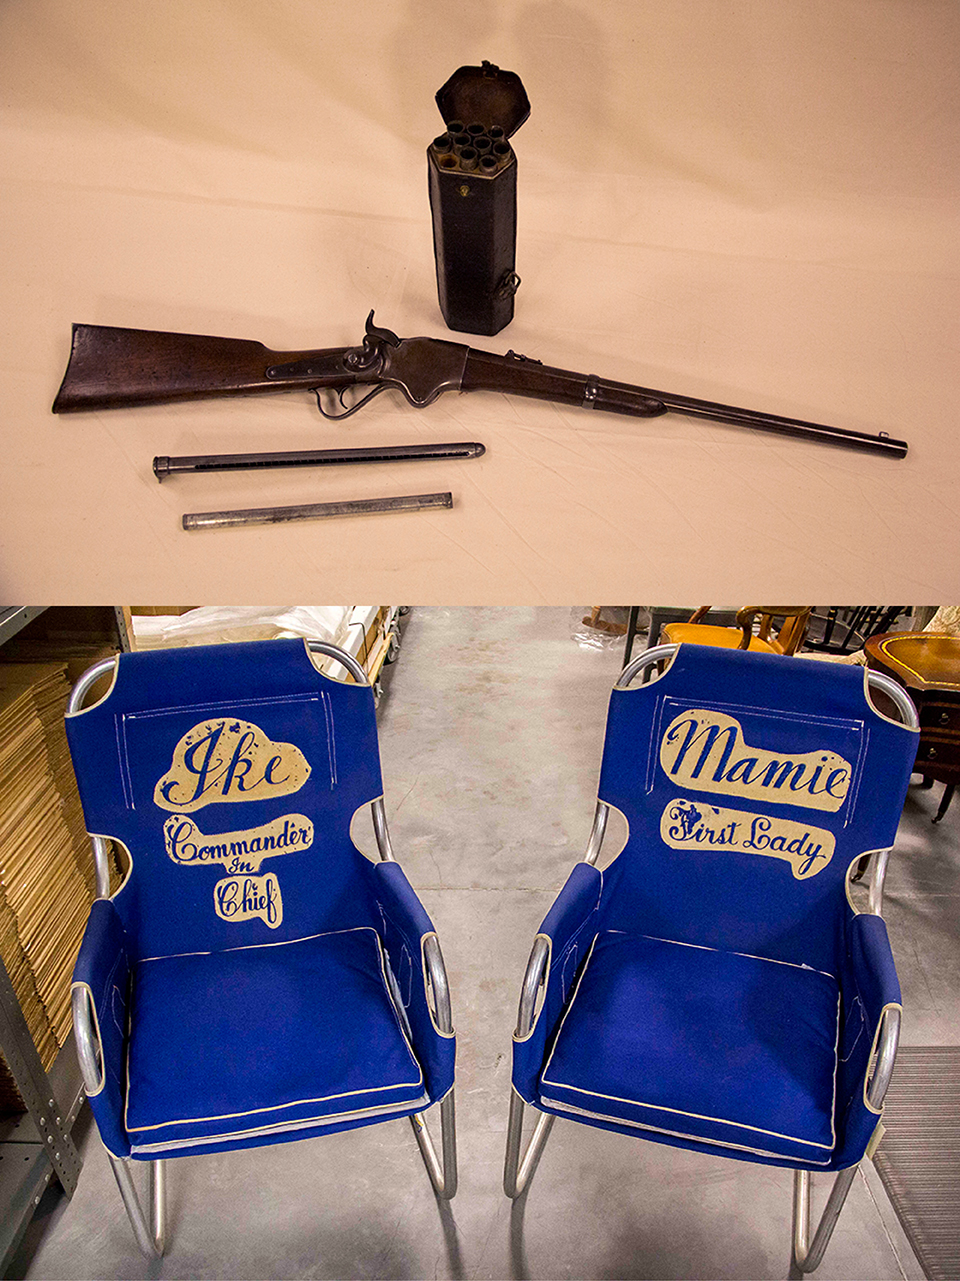 A Civil War era repeating rifle and Ike and Mamie Eisenhower's folding chairs.